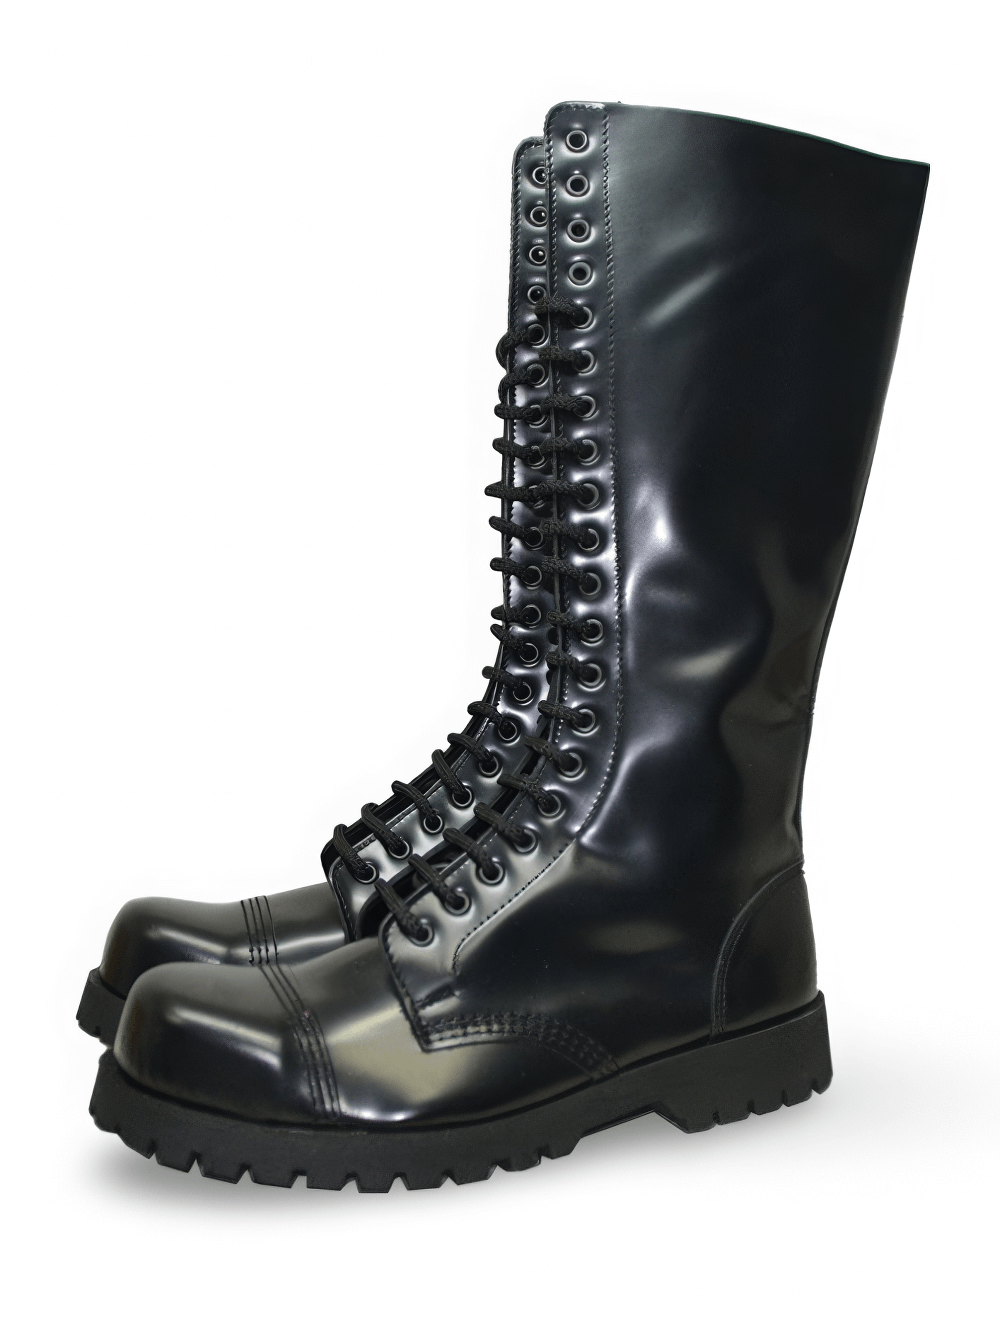 20-Eyelet Black Rangers Boots with Steel Toe Cap